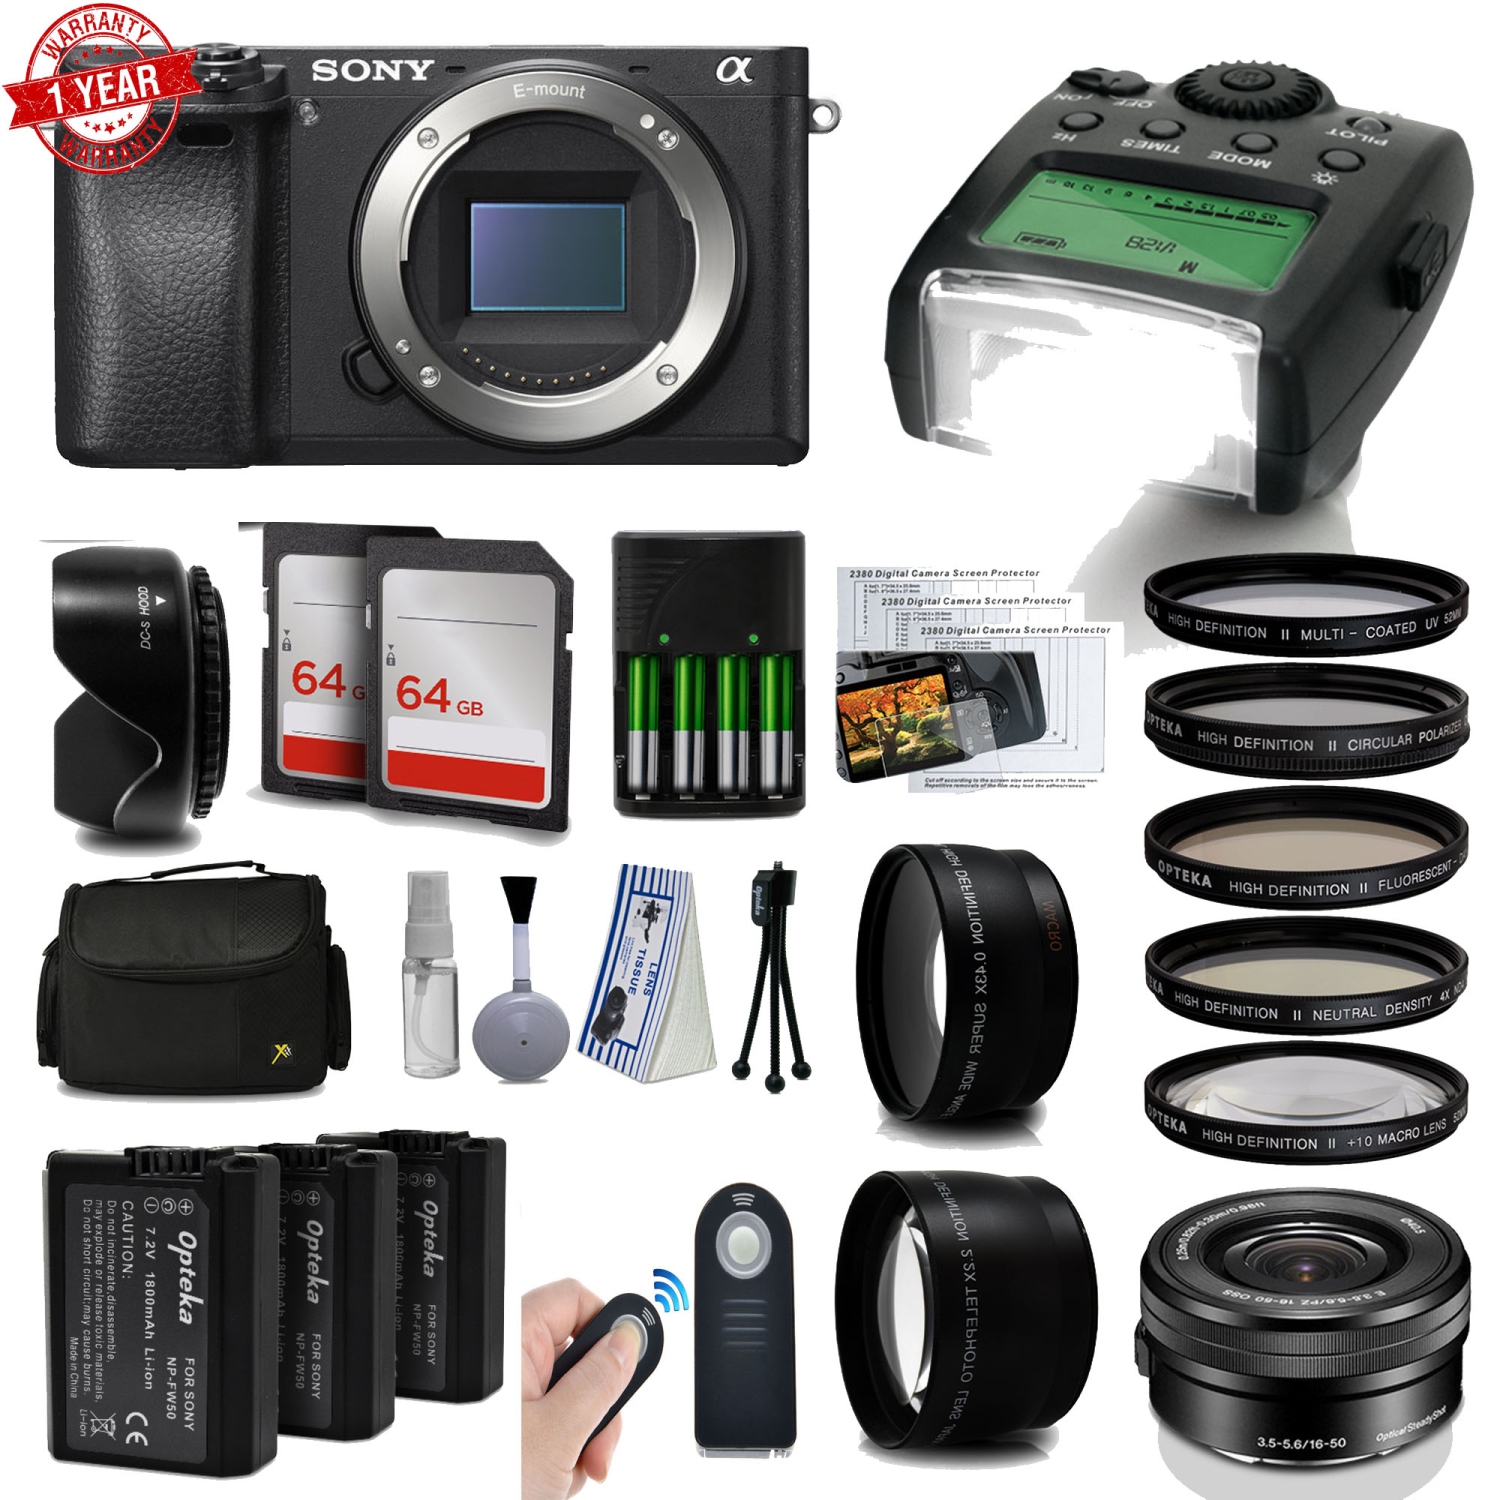 Sony Alpha A6300 Mirrorless Black Camera Kit with 16-50mm and Filter Bundle - US Version w/ Seller Warranty